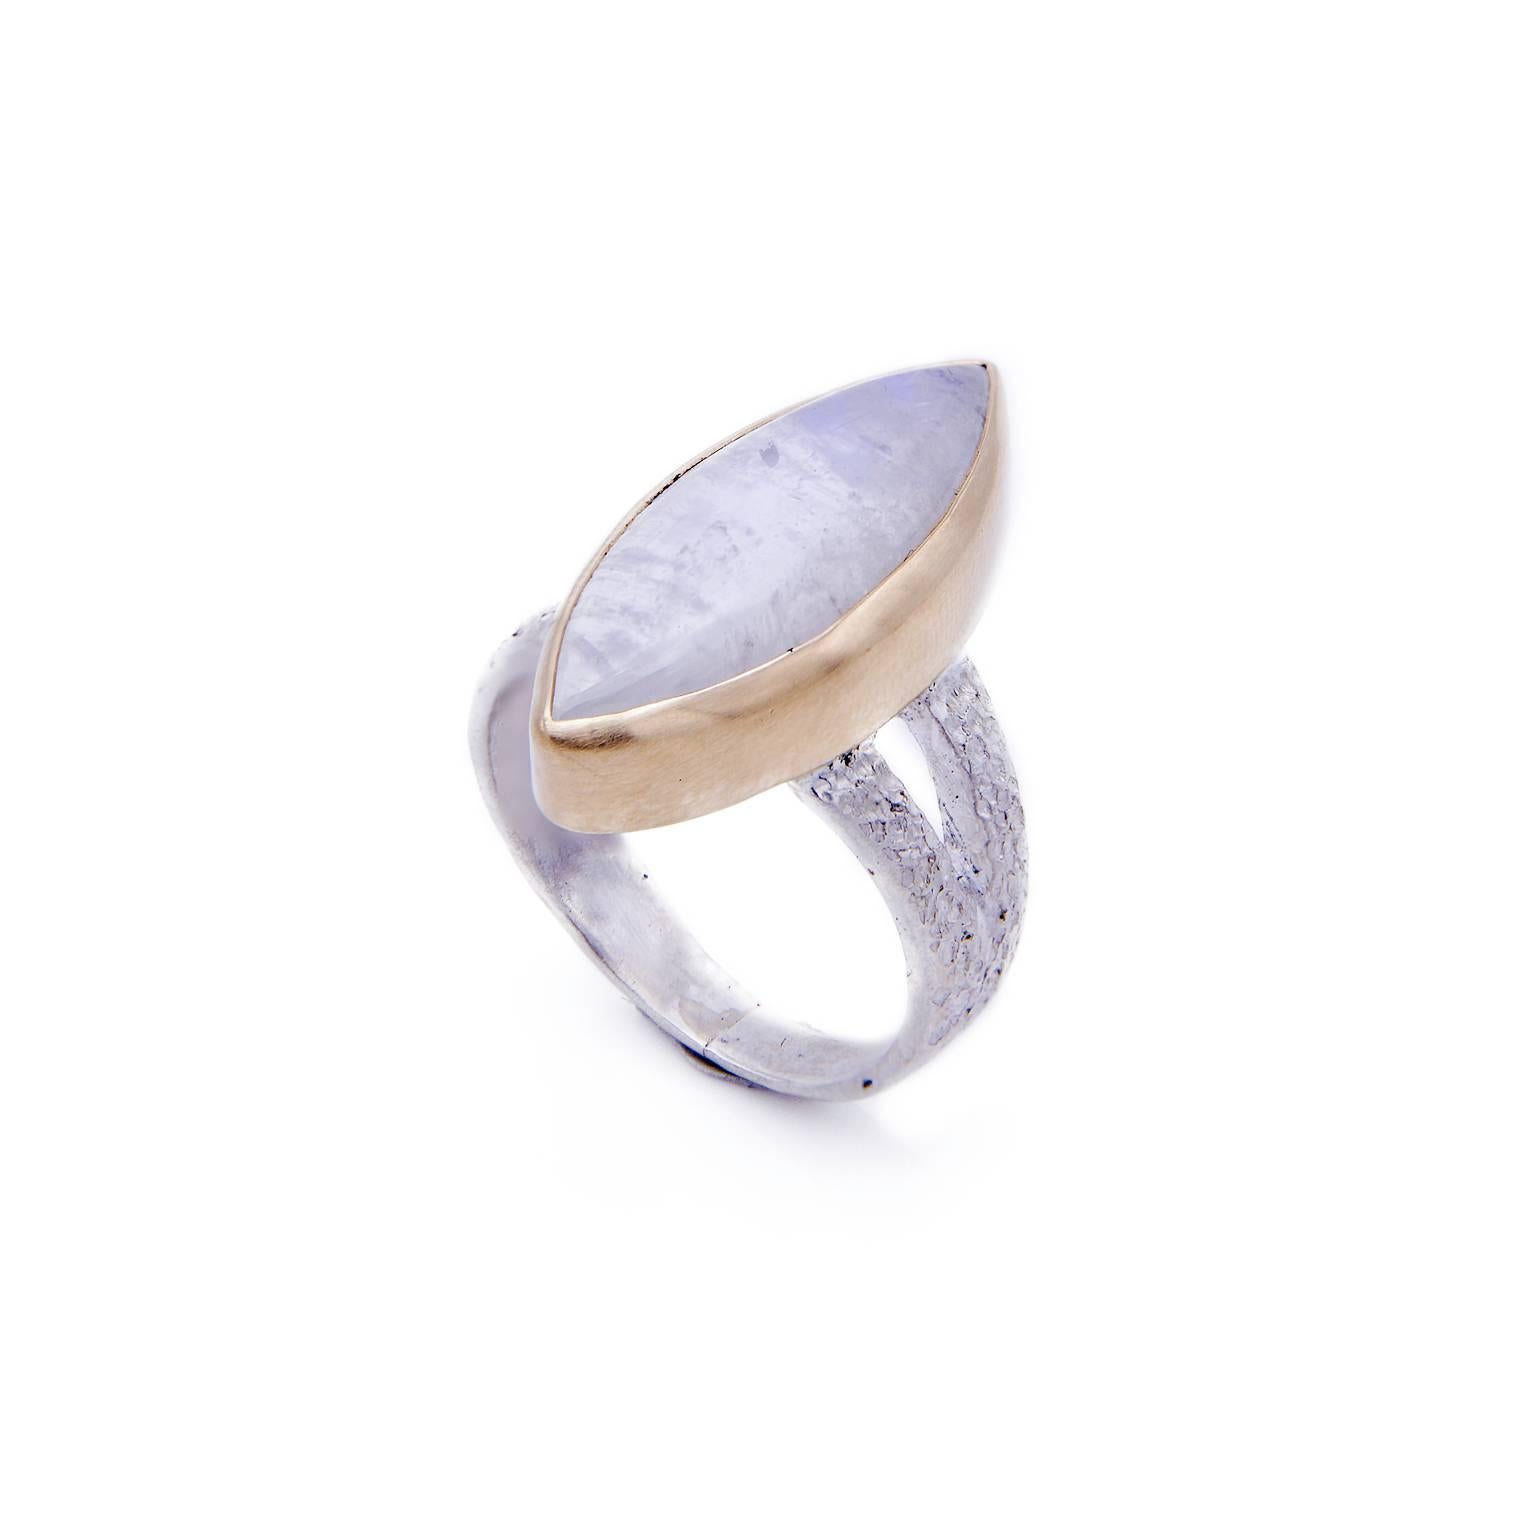 A gorgeous marquise moonstone statement ring with an elegant bluish-purple sheen. The satin finish gold bezel is complimented by a textured white sterling silver band that is perfectly hammered and hand detailed. It was made by our resident designer